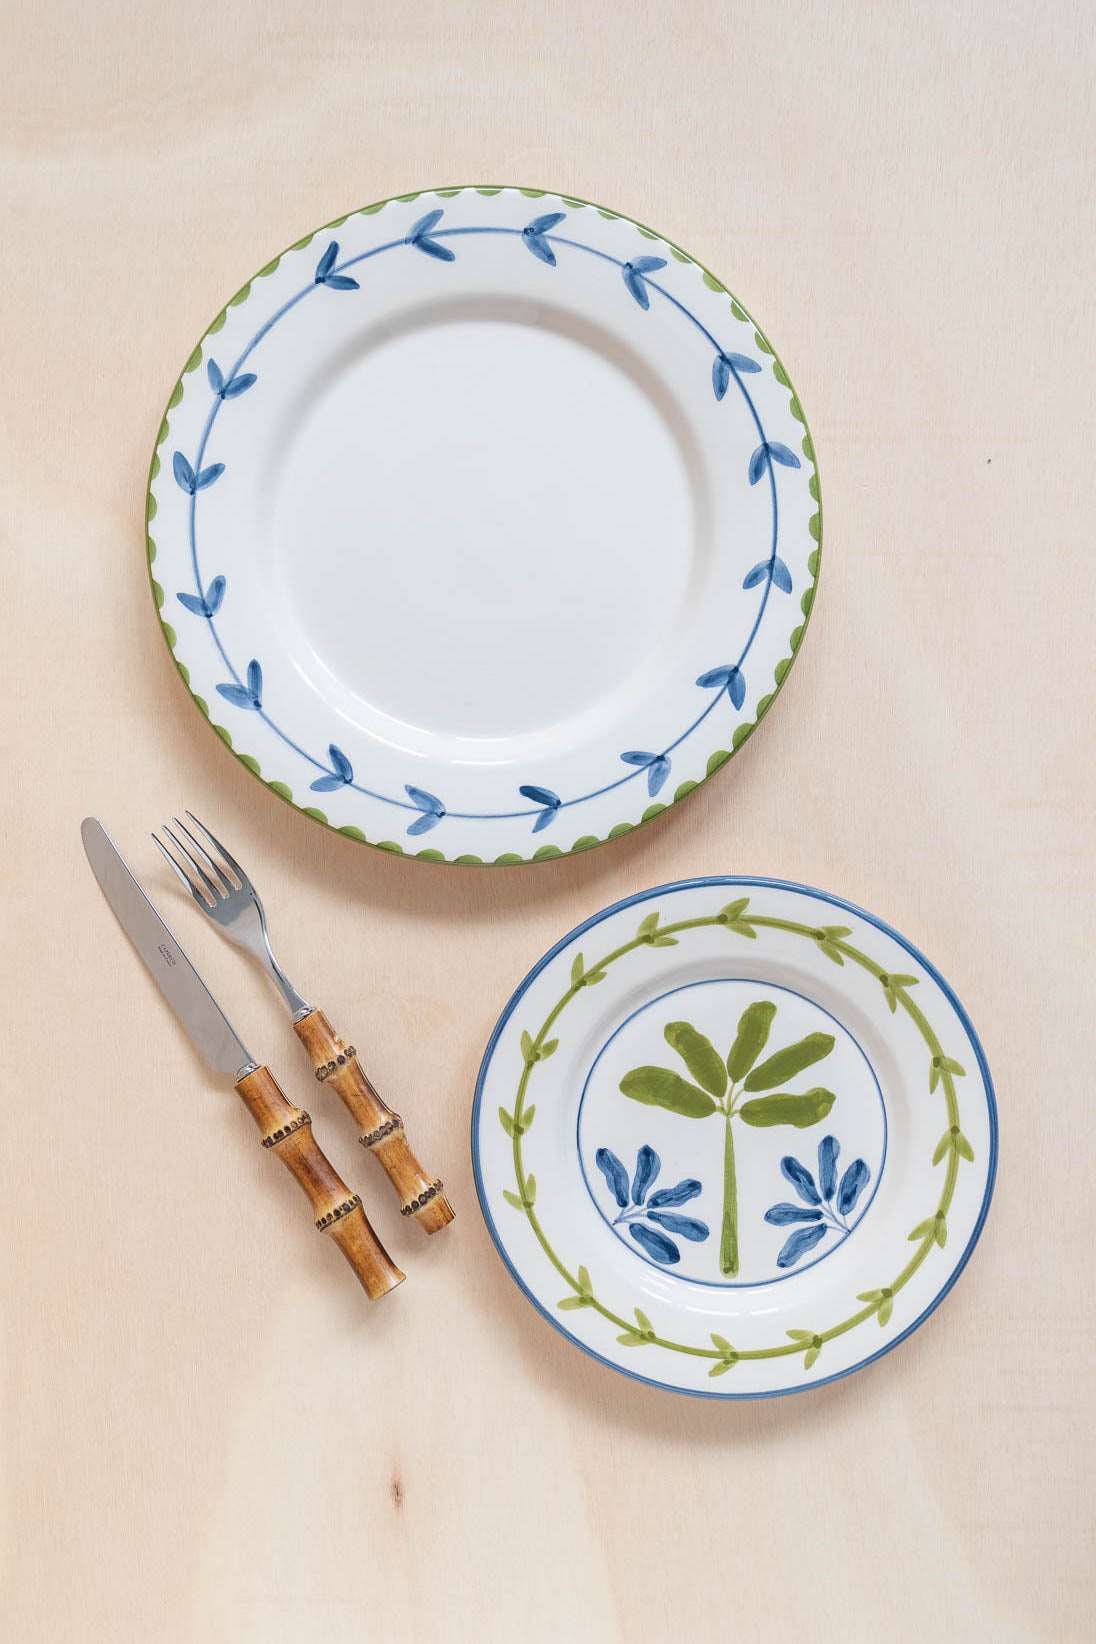 Banana Hand-Painted Dinner Plate - Matching with Bananeira Dessert Plate and Bamboo Cutler - Front Image